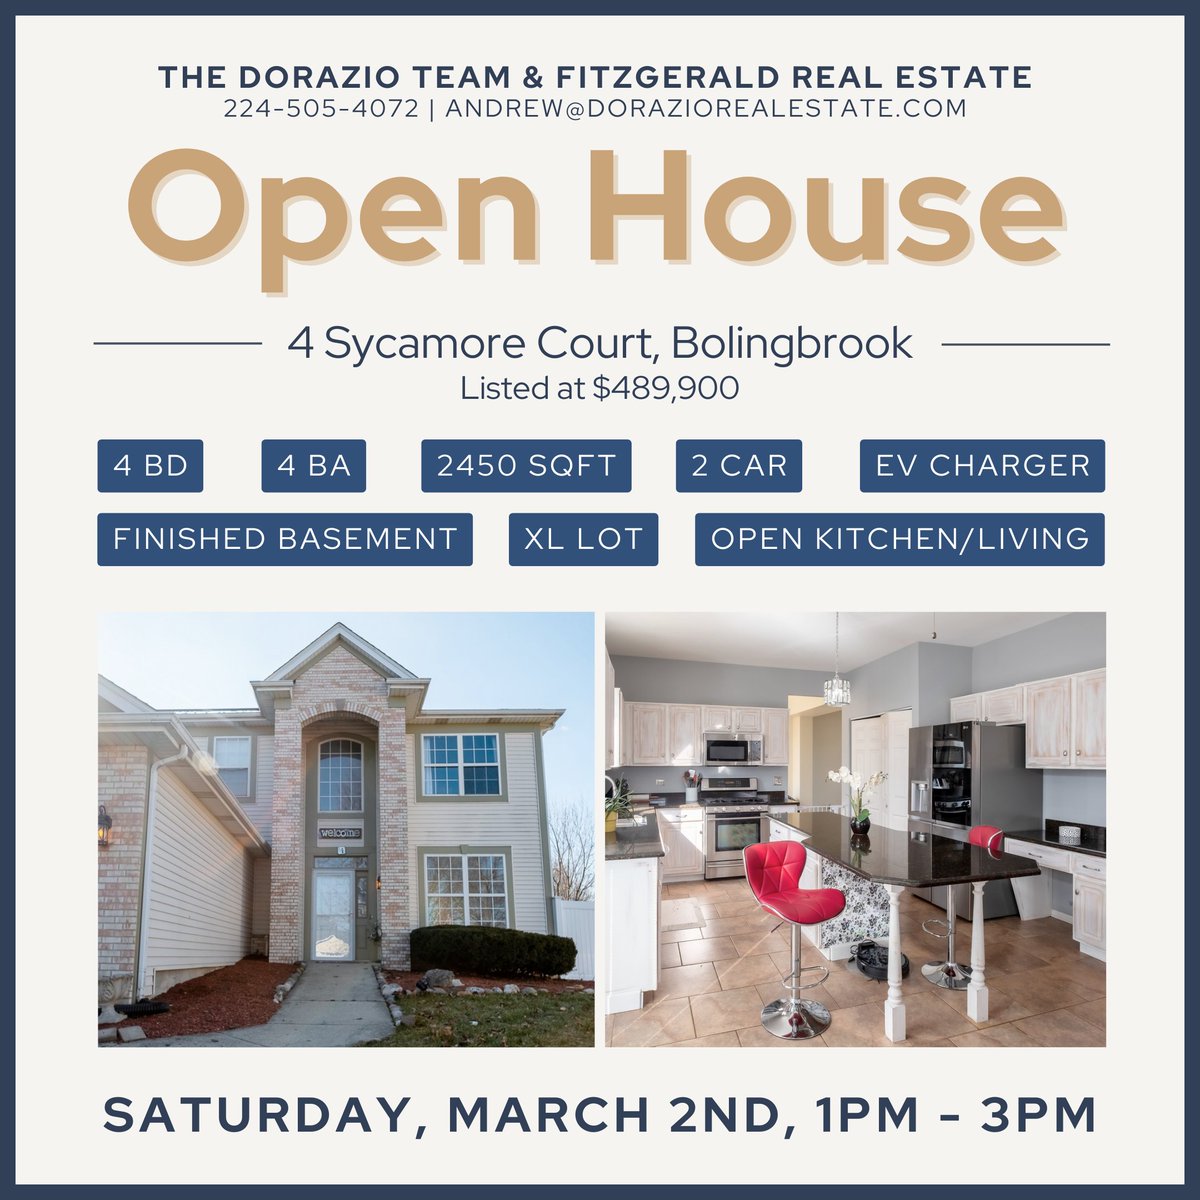 🏡 Open house this weekend for a Bolingbrook gem! 💎

Saturday, March 2, 1PM-3PM - Come take a tour and say hello!

#doraziorealestate #dorazioteam #fitzgeraldrealestate #openhouse #Bolingbrook #suburbanliving #bolingbrookopenhouse #BolingbrookRealEstate #openhousethisweekend